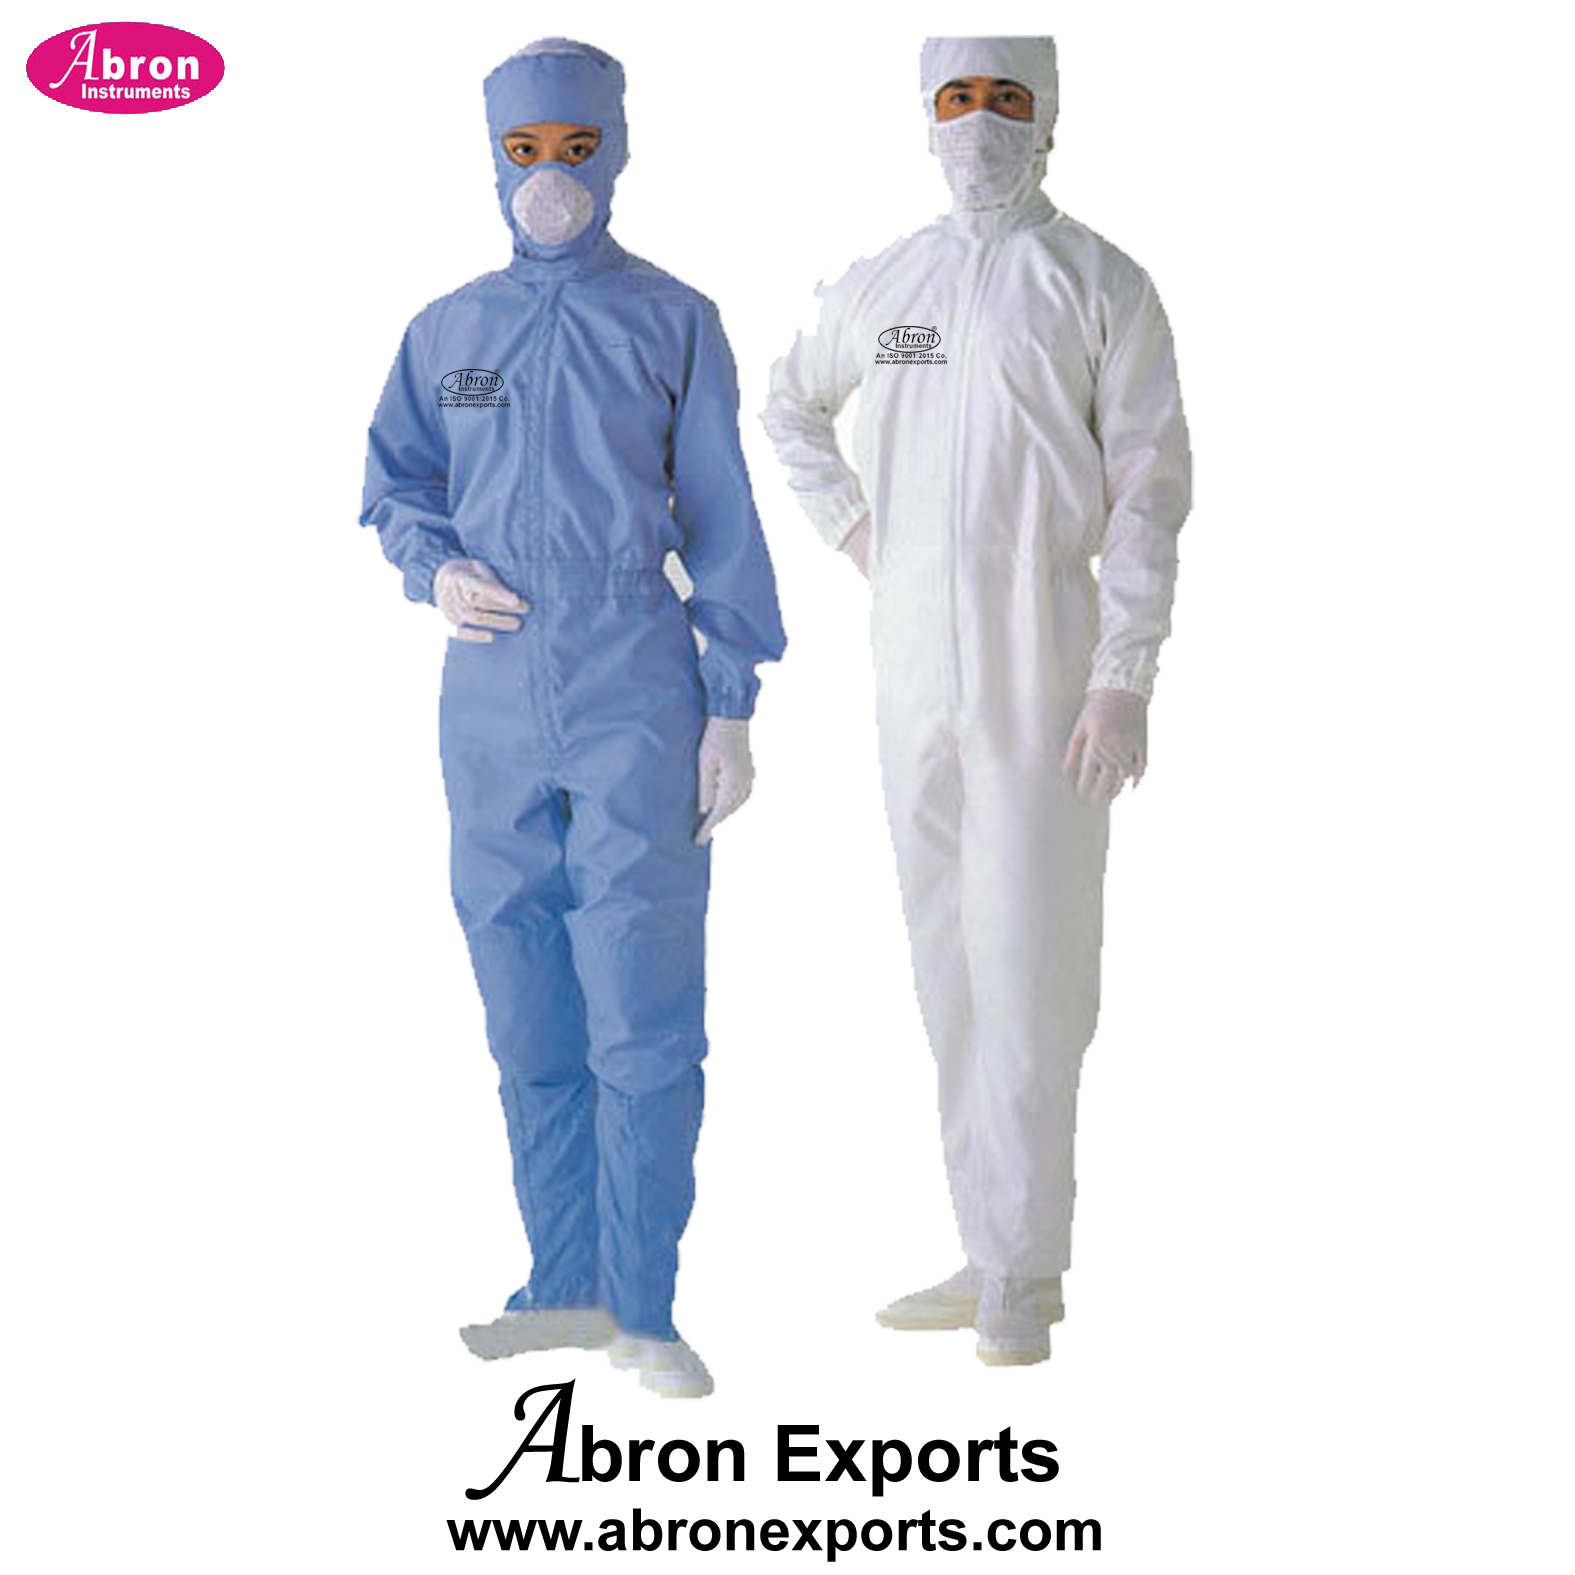 Coverall White or Blue Protective Gloves Cap Shoe Cover Coveralls Set Abron ABM-2652C